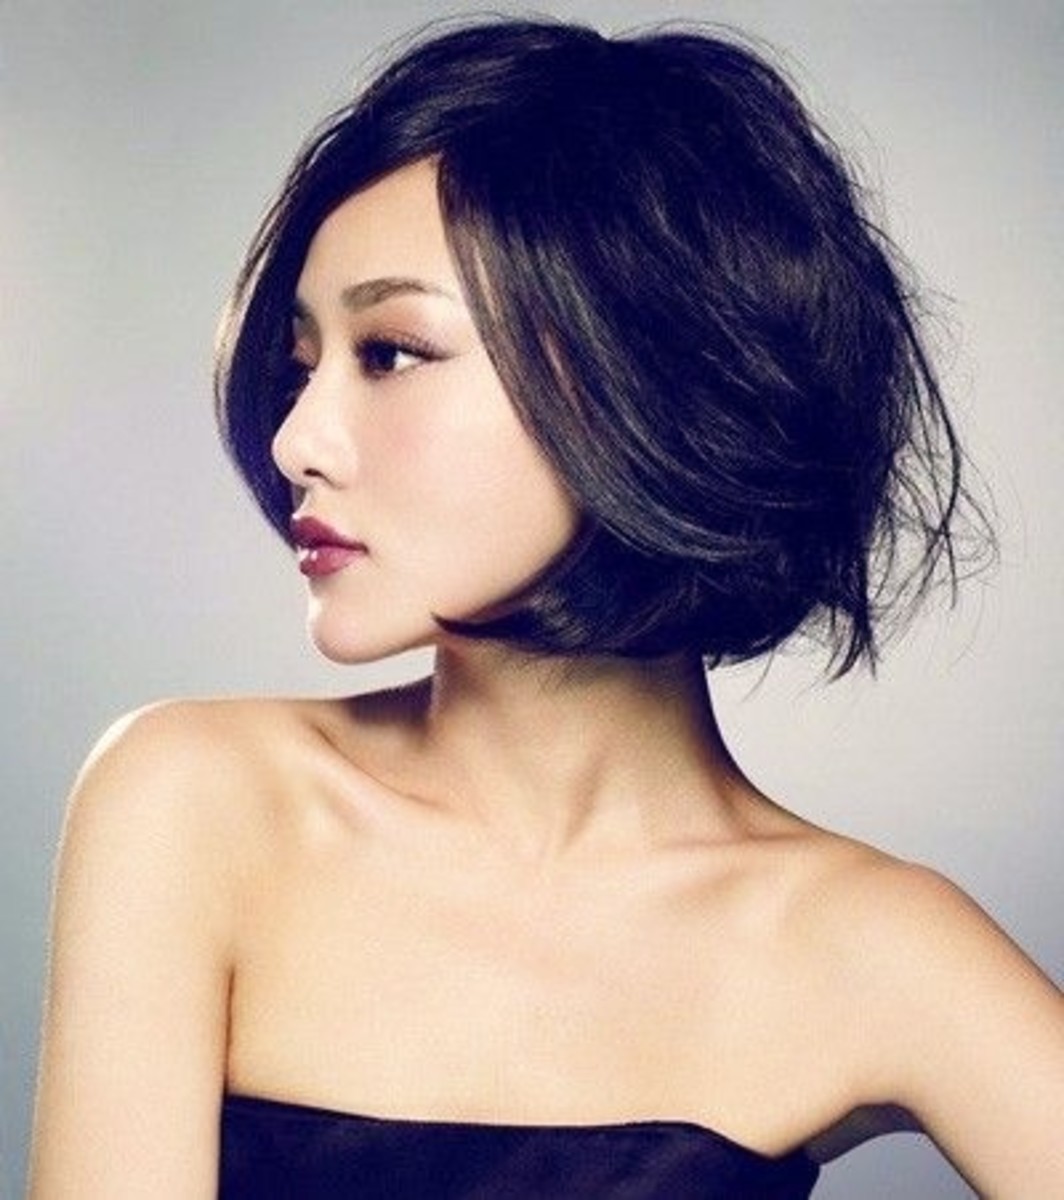 The 10 Best Summer Hairstyles for Asian Women | HubPages